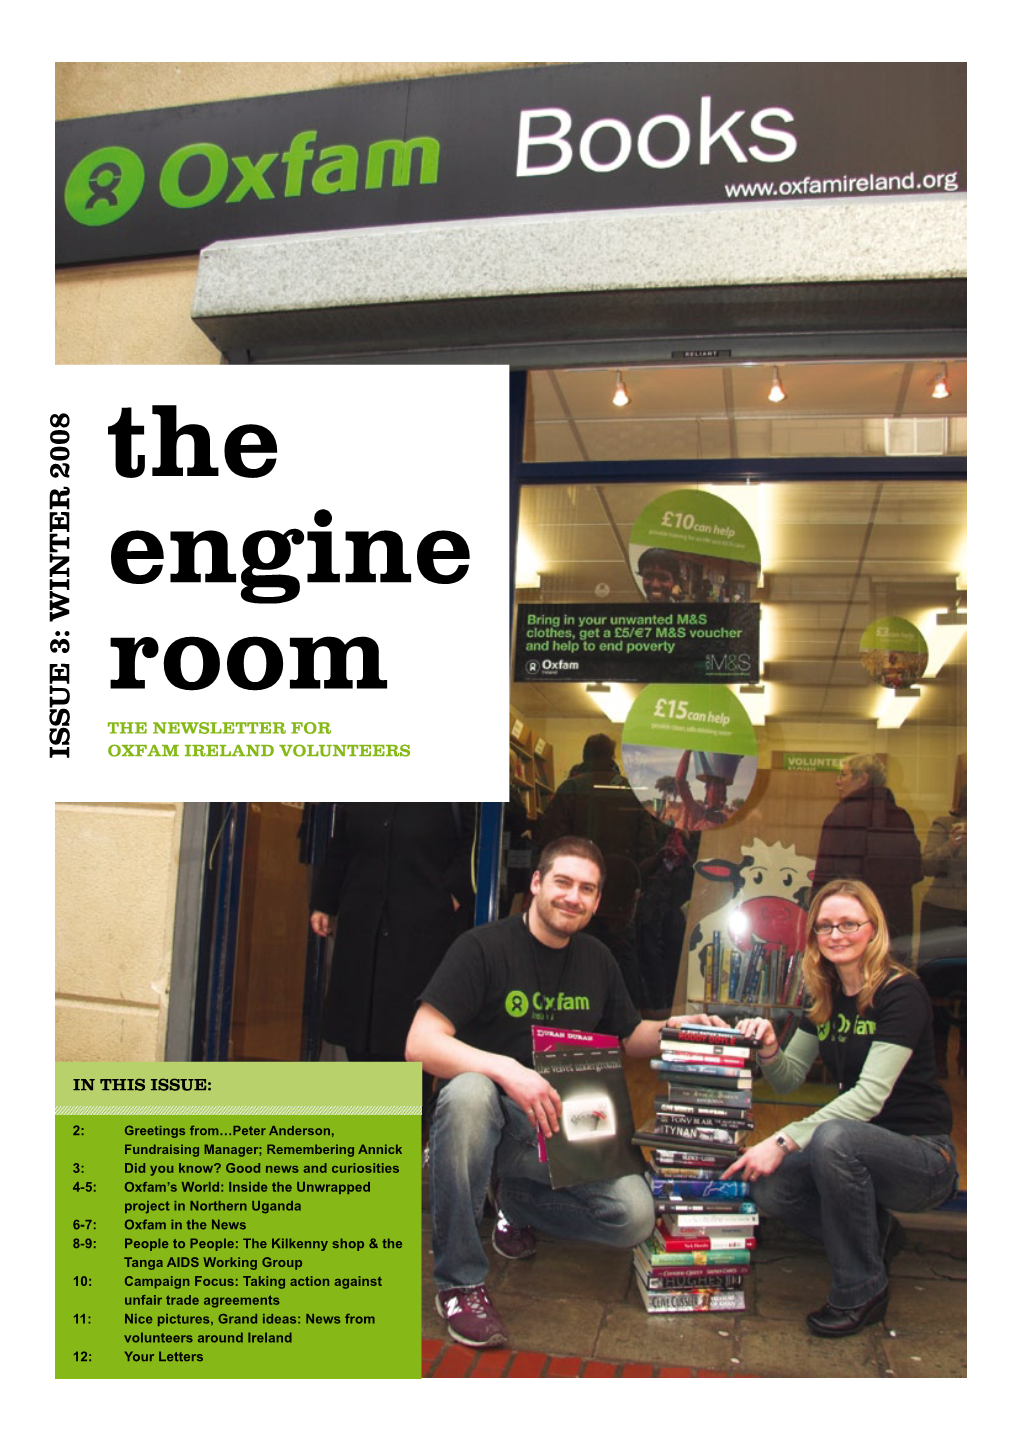 The Engine Room the NEWSLETTER FOR